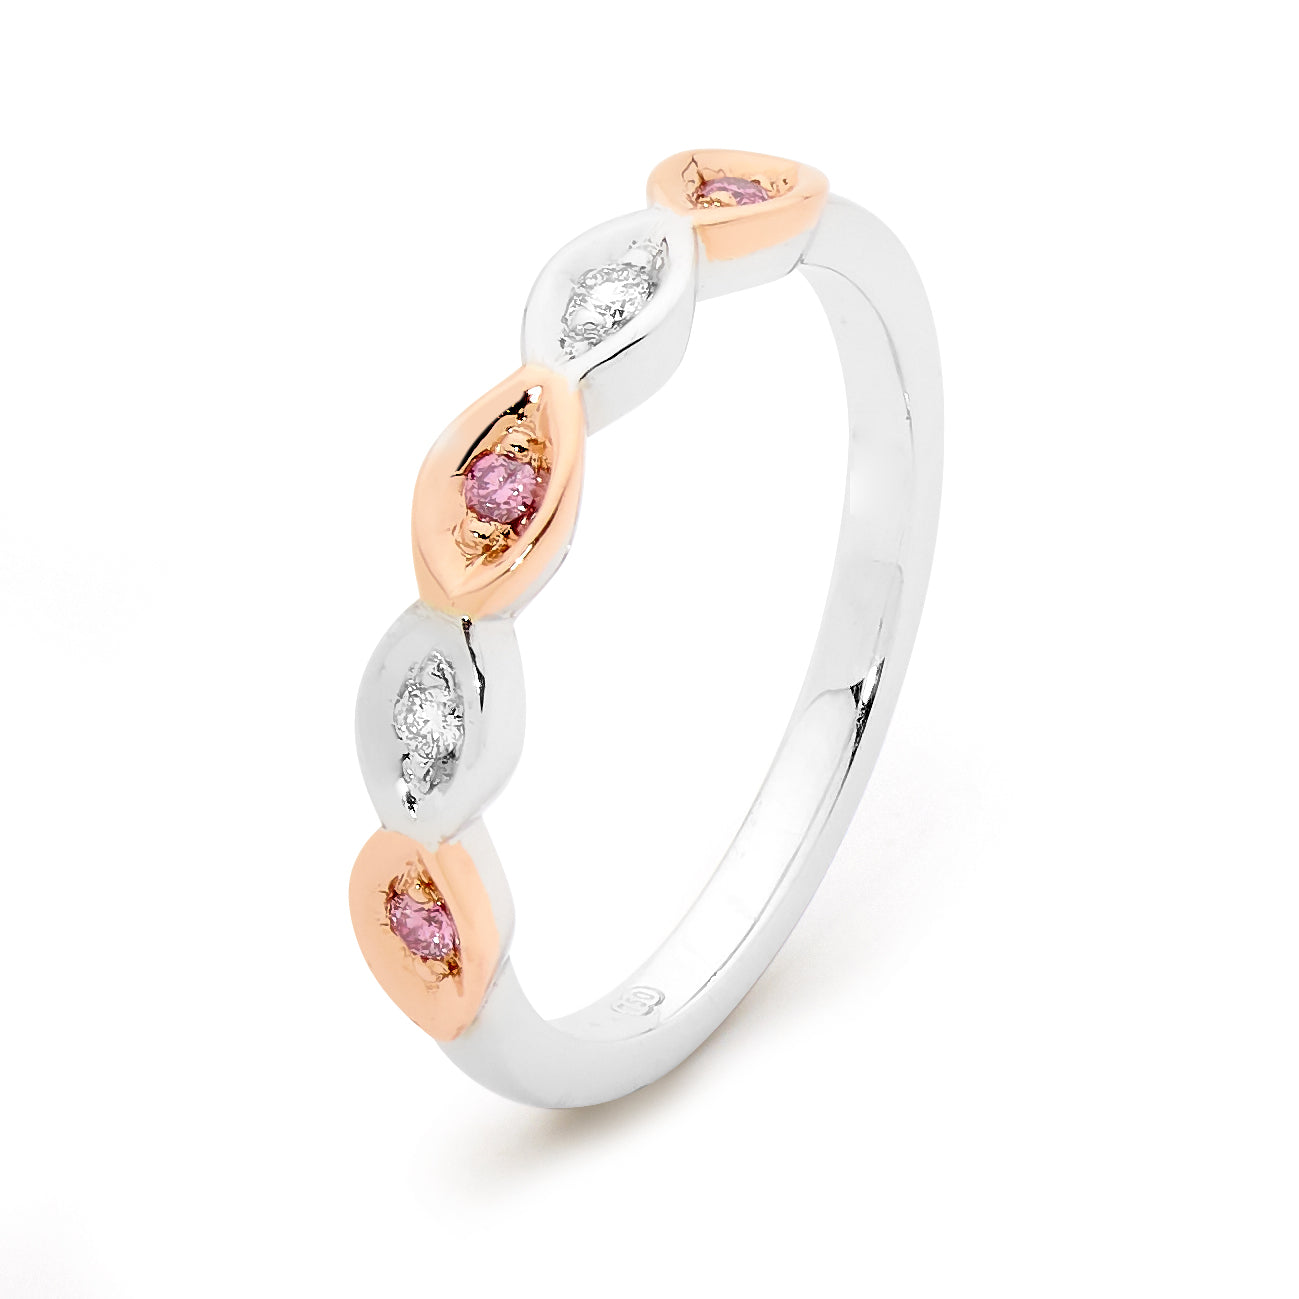 Ellendale Platinum And 18Ct Rose Gold Argyle White And Pink Champagne Diamond Wedding Band